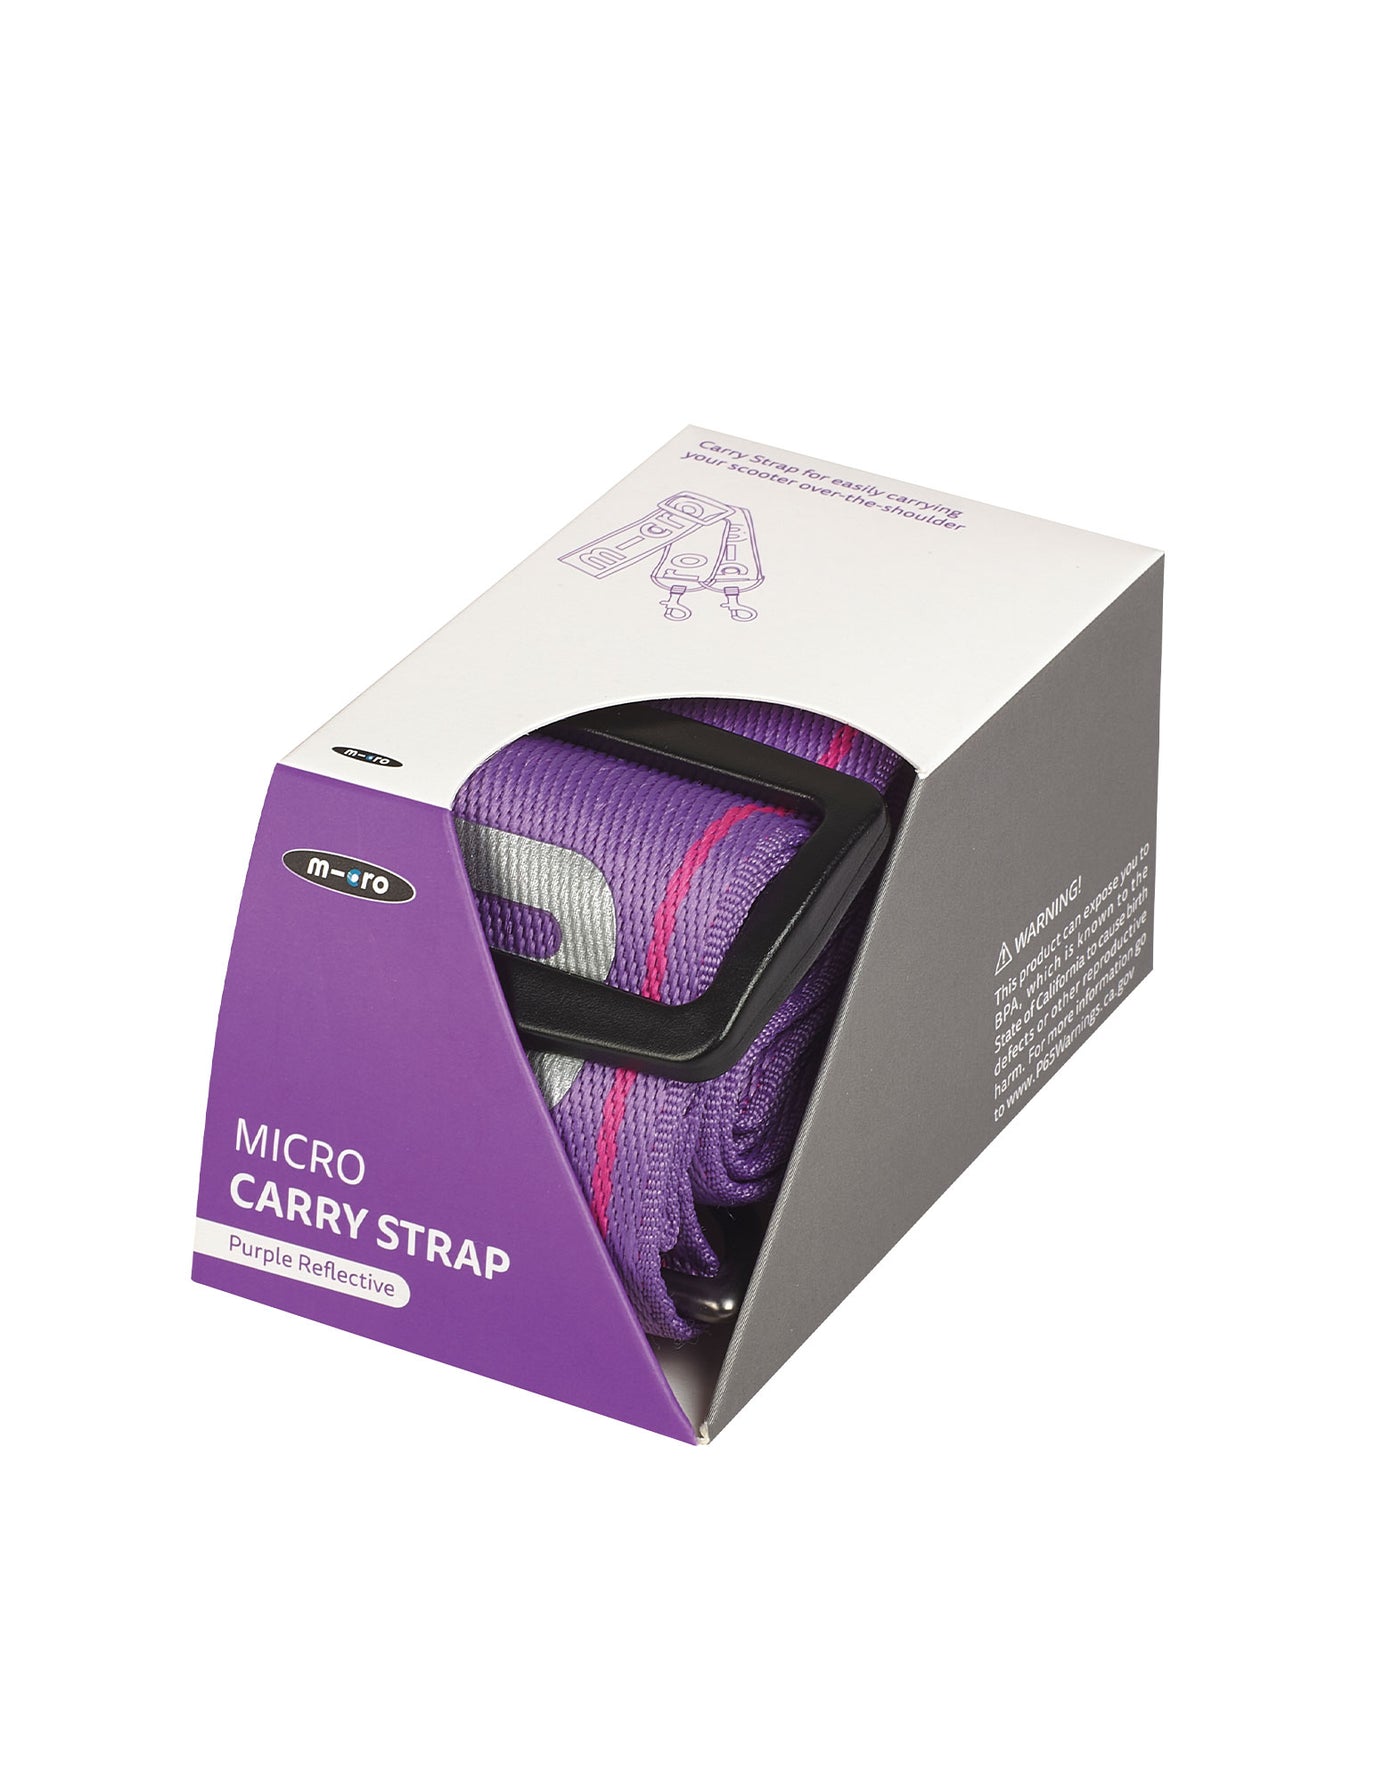 purple reflective scooter carry strap in box